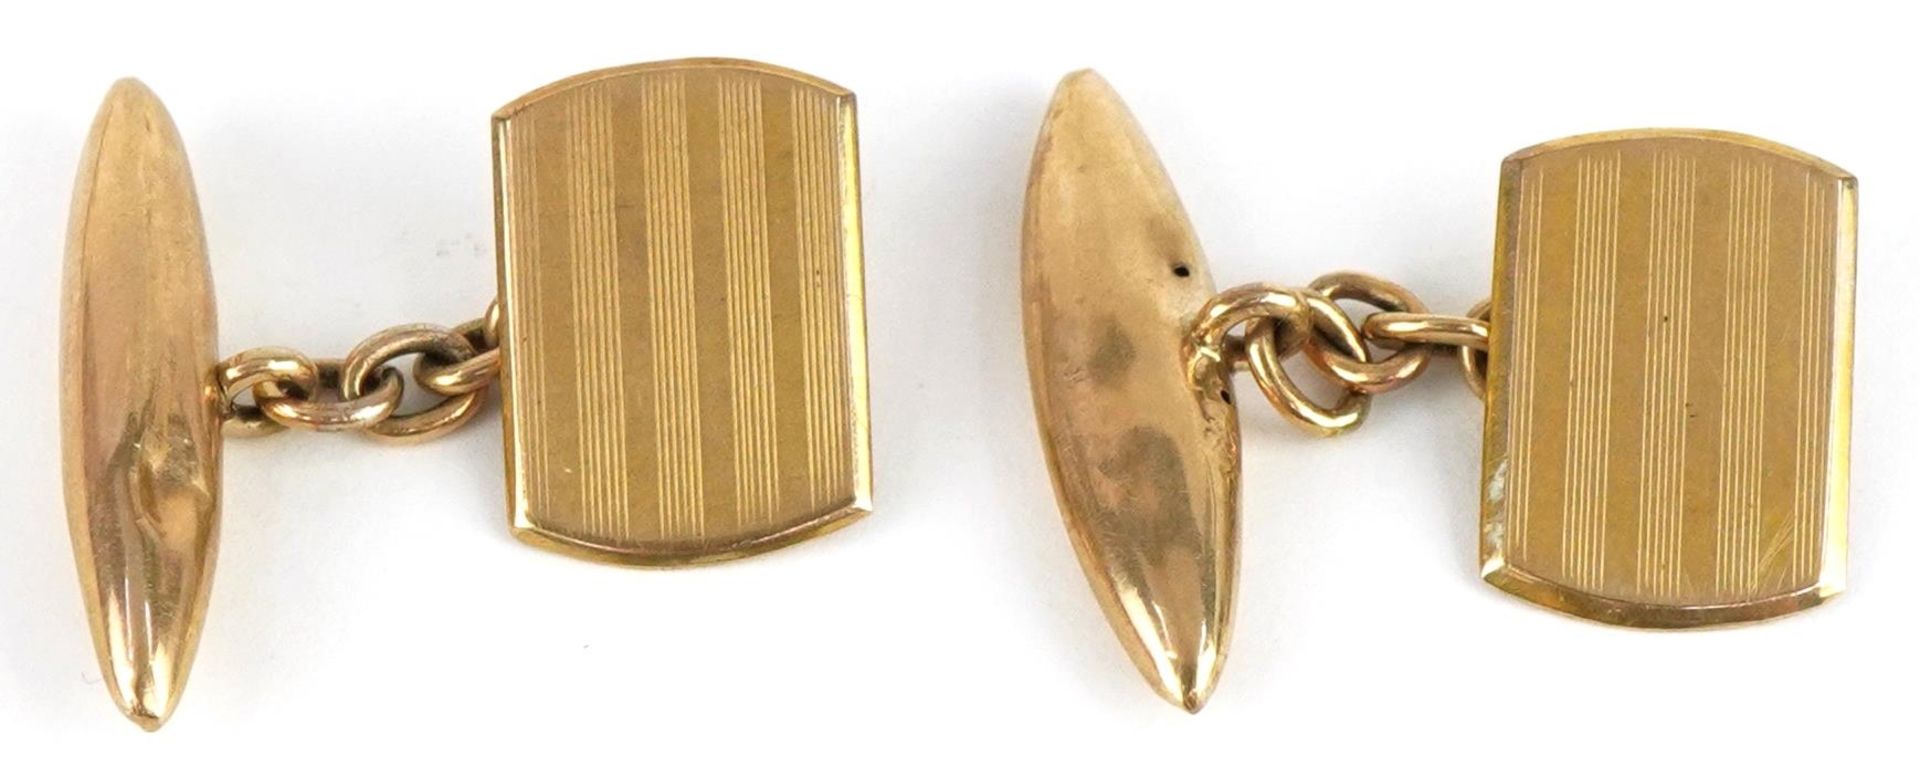 Pair of 9ct gold engine turned cufflinks, 2.5cm wide, 5.7g : For further information on this lot